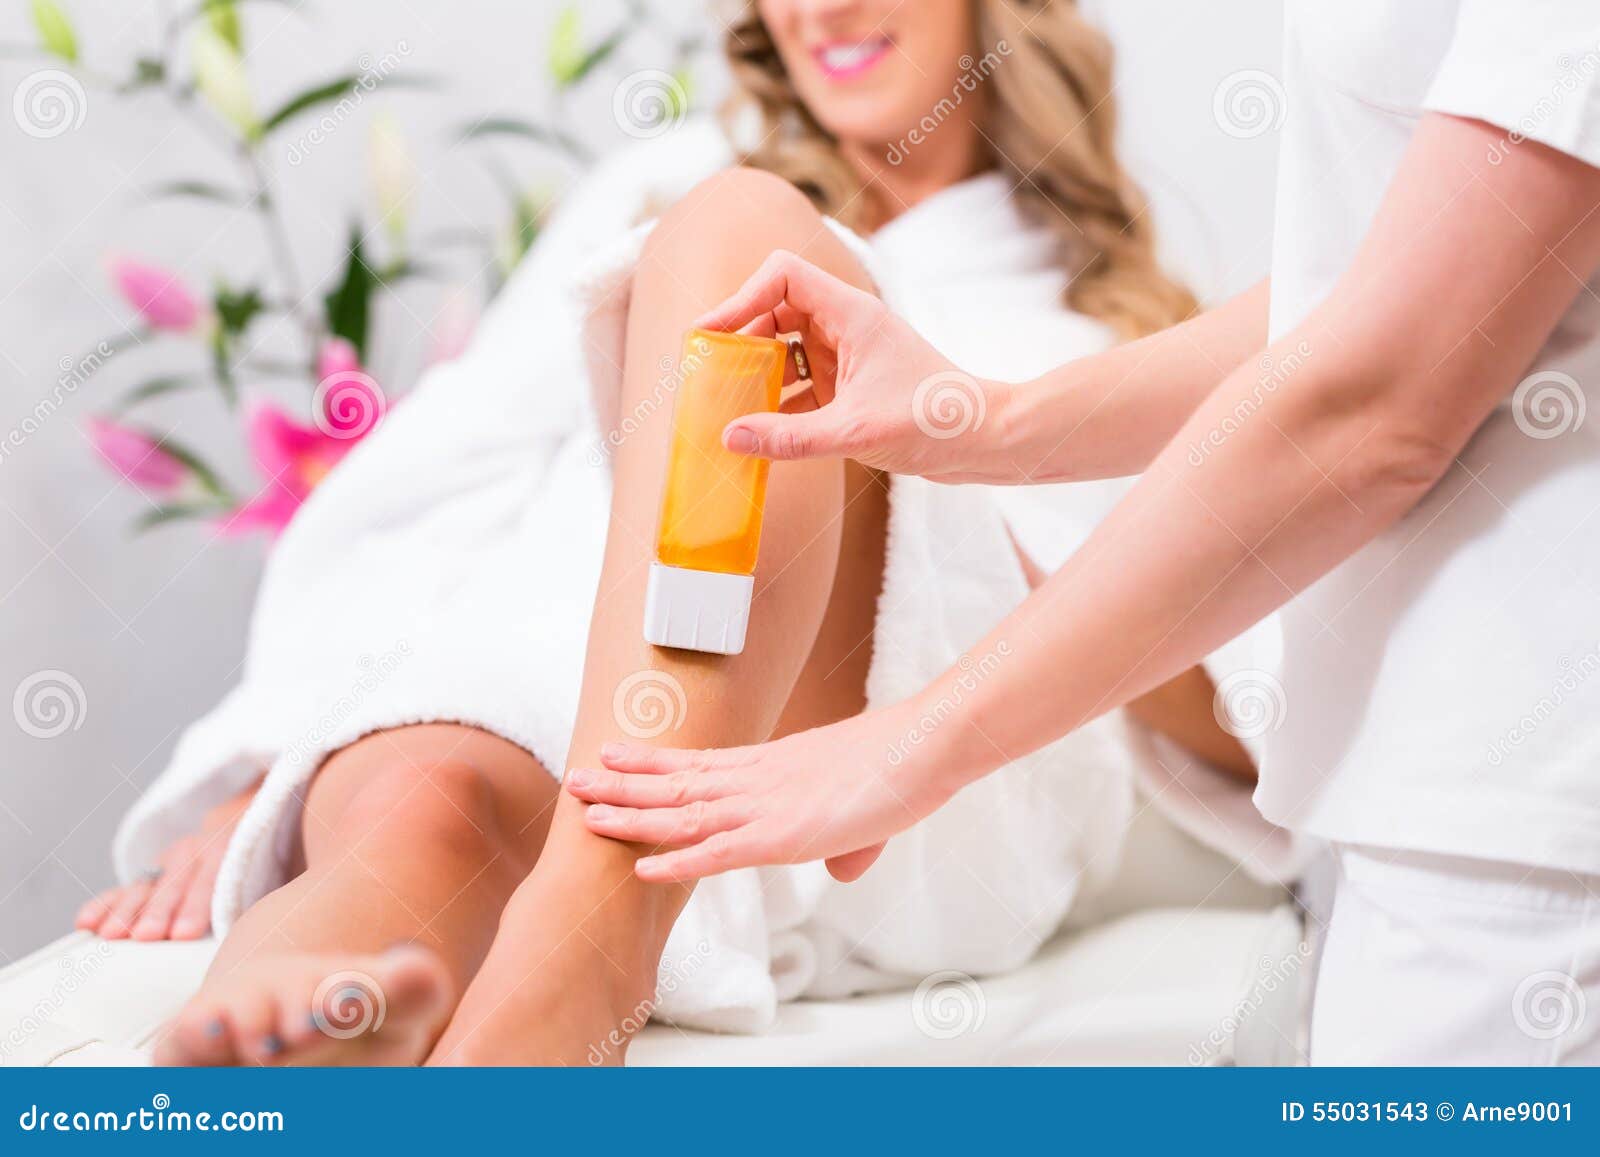 woman at waxing hair removal in beauty parlor